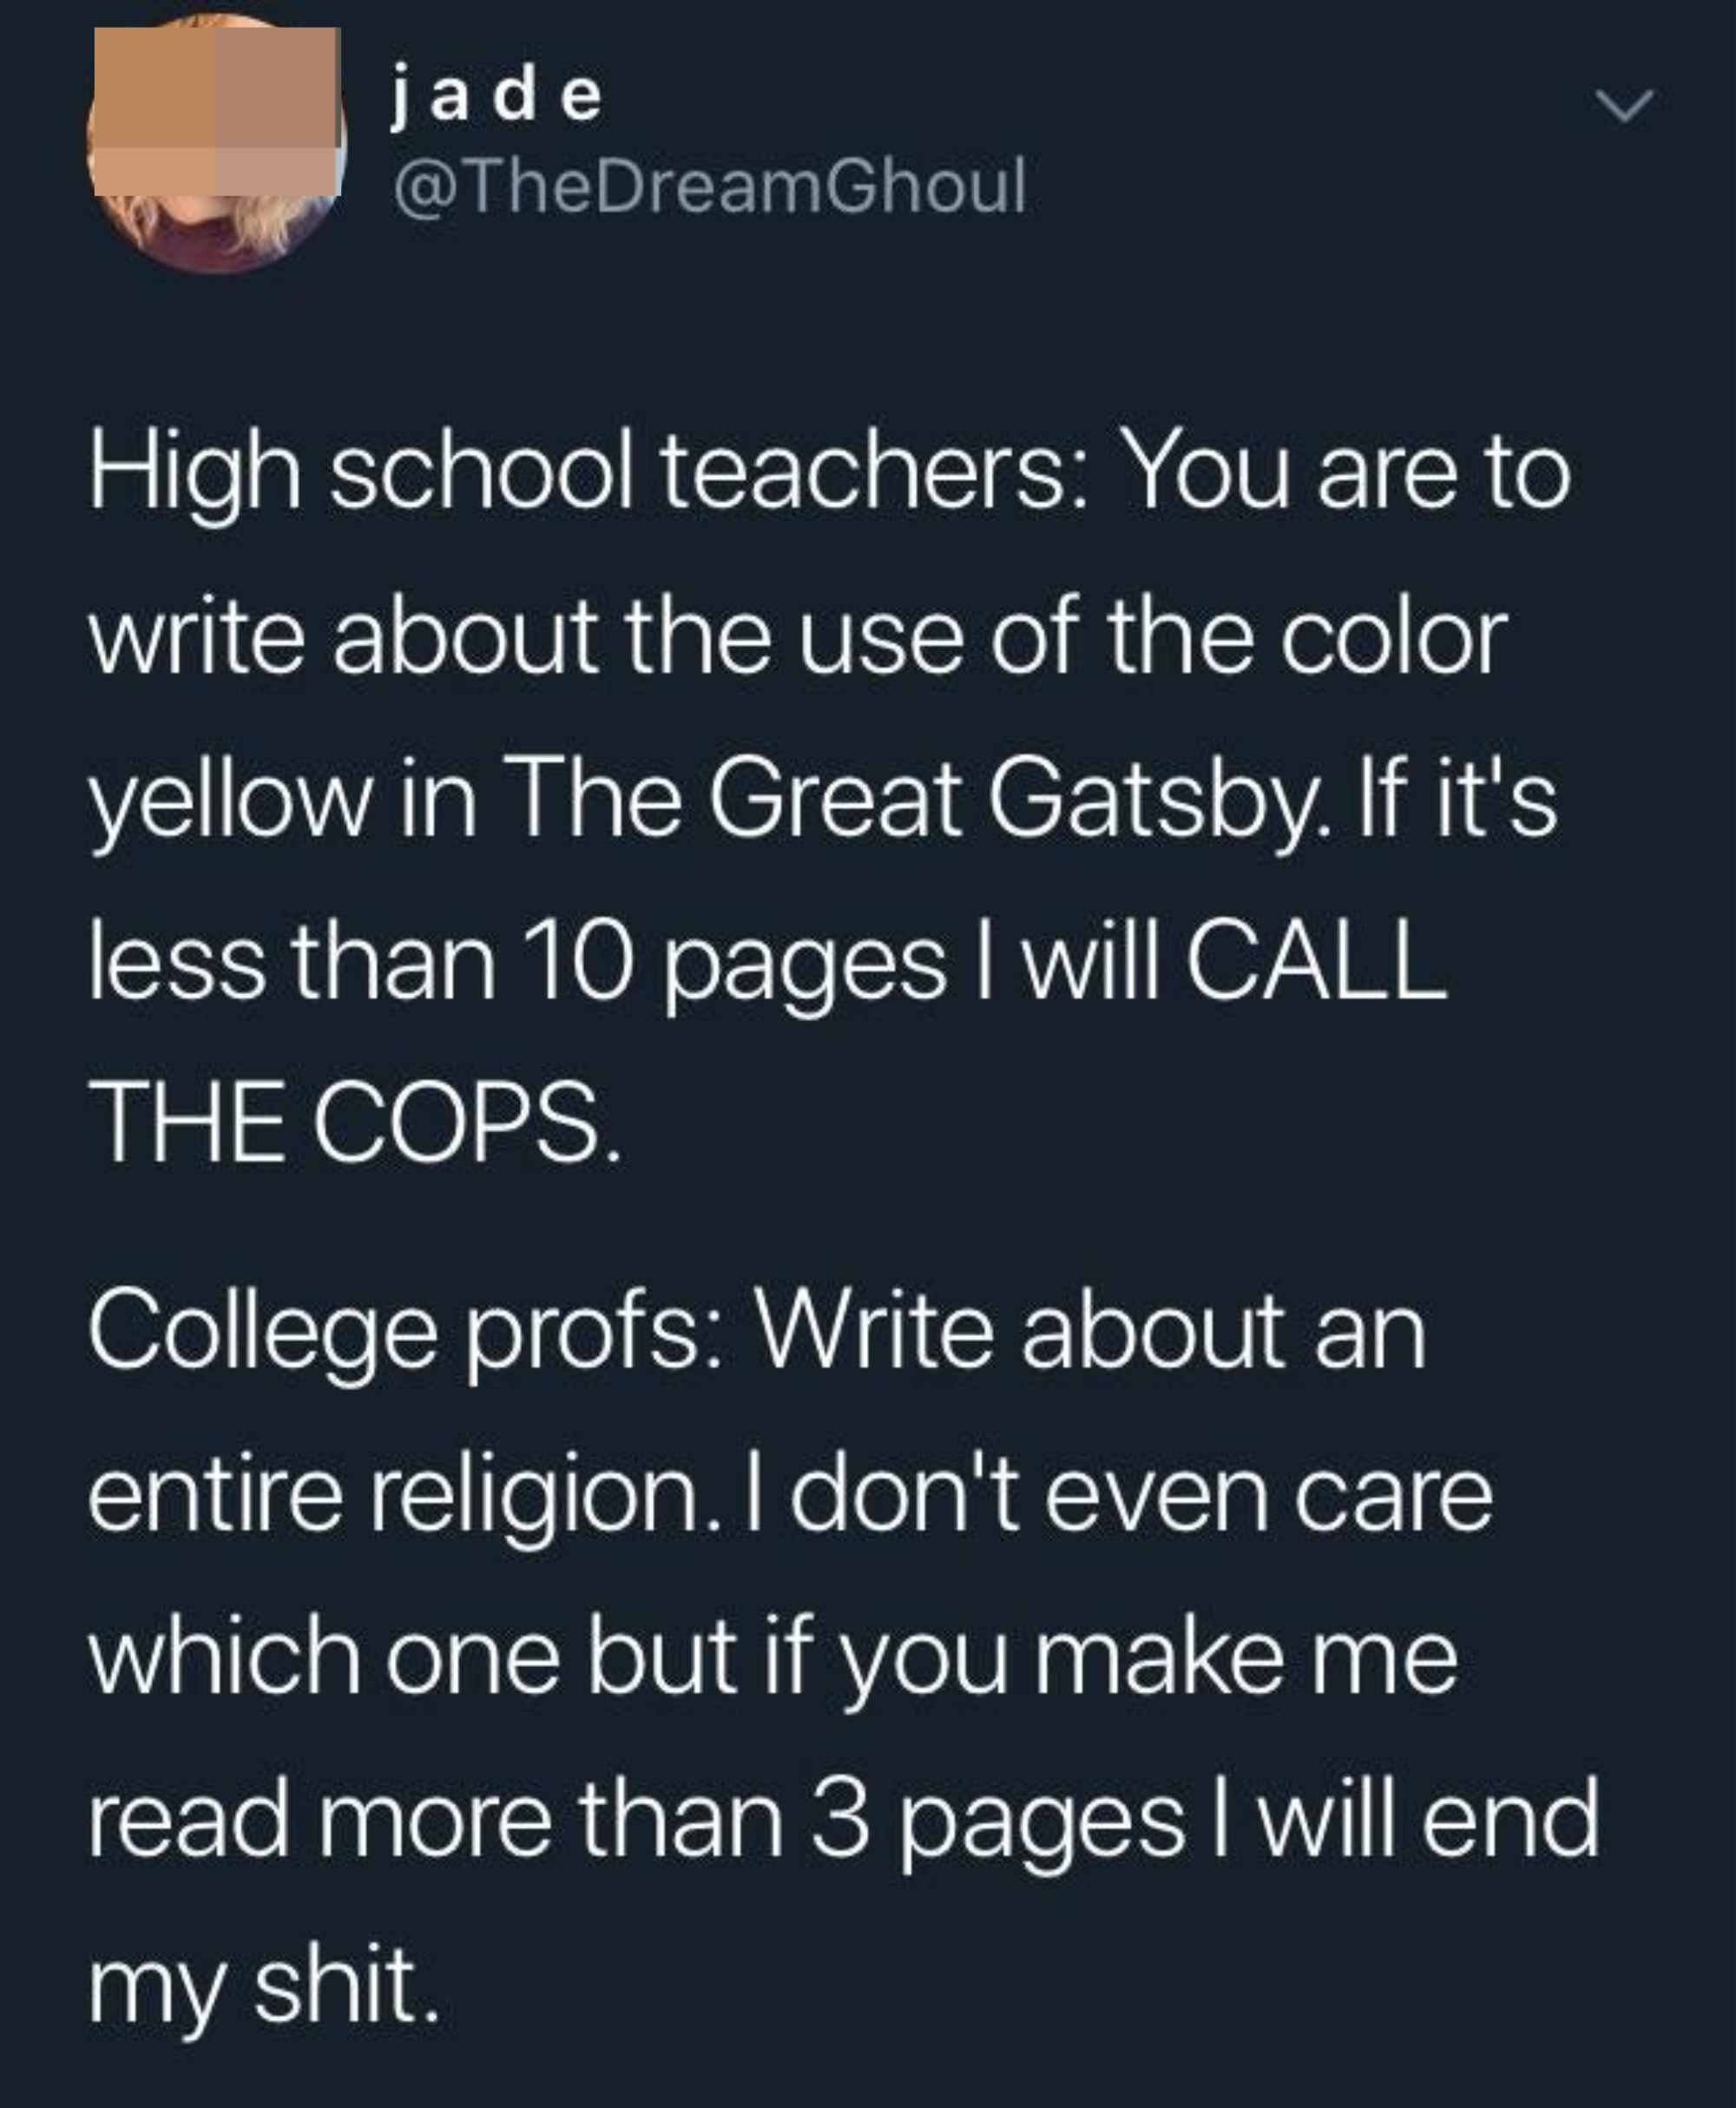 &quot;Write about an entire religion. I don&#x27;t even care which one but if you make me read more than 3 pages I will end my shit.&quot;